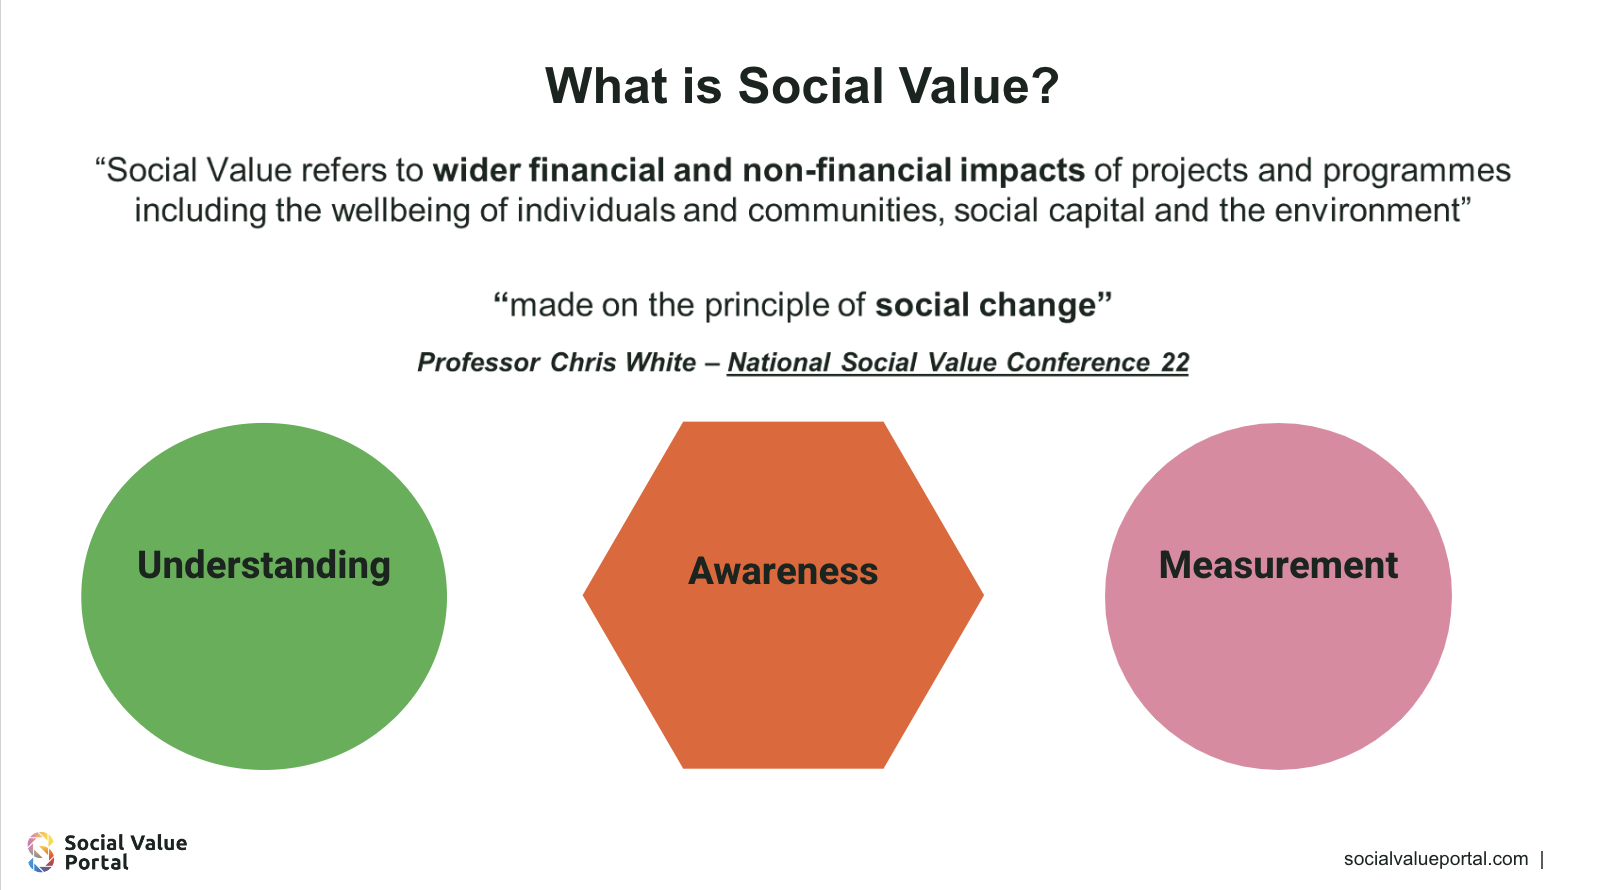 What is social value?